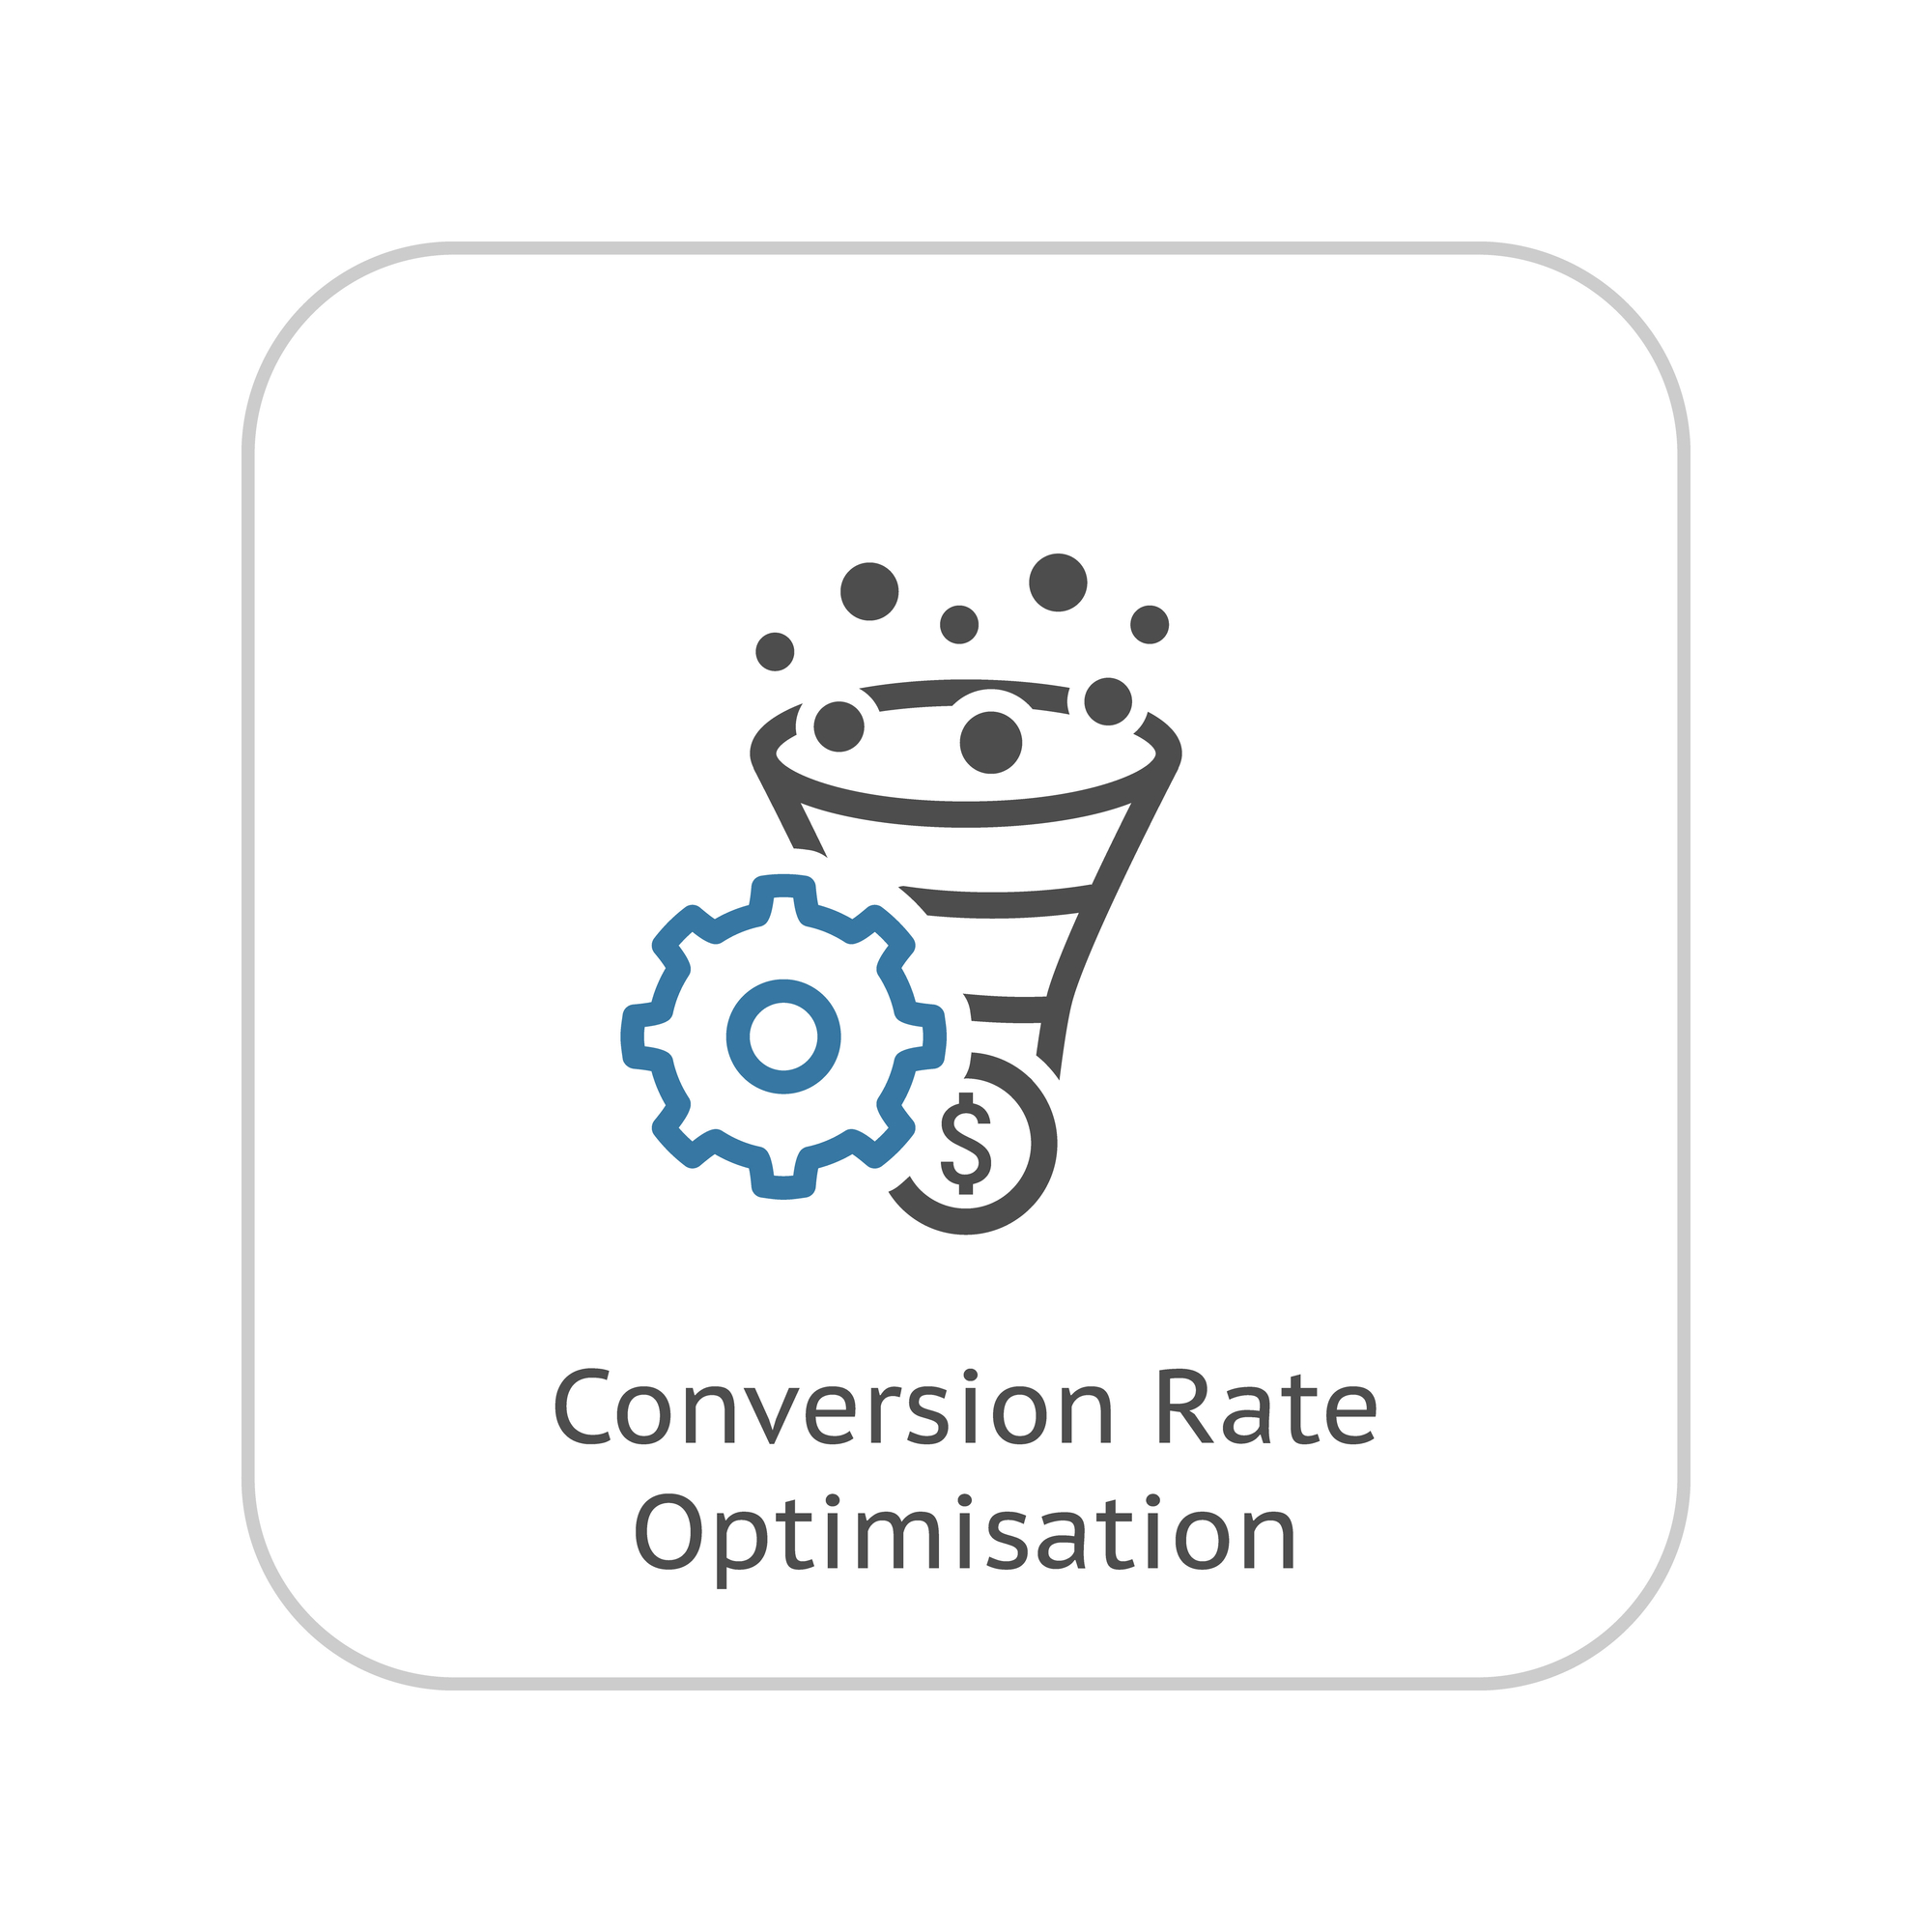 A graph of Conversion Rate Optimisation